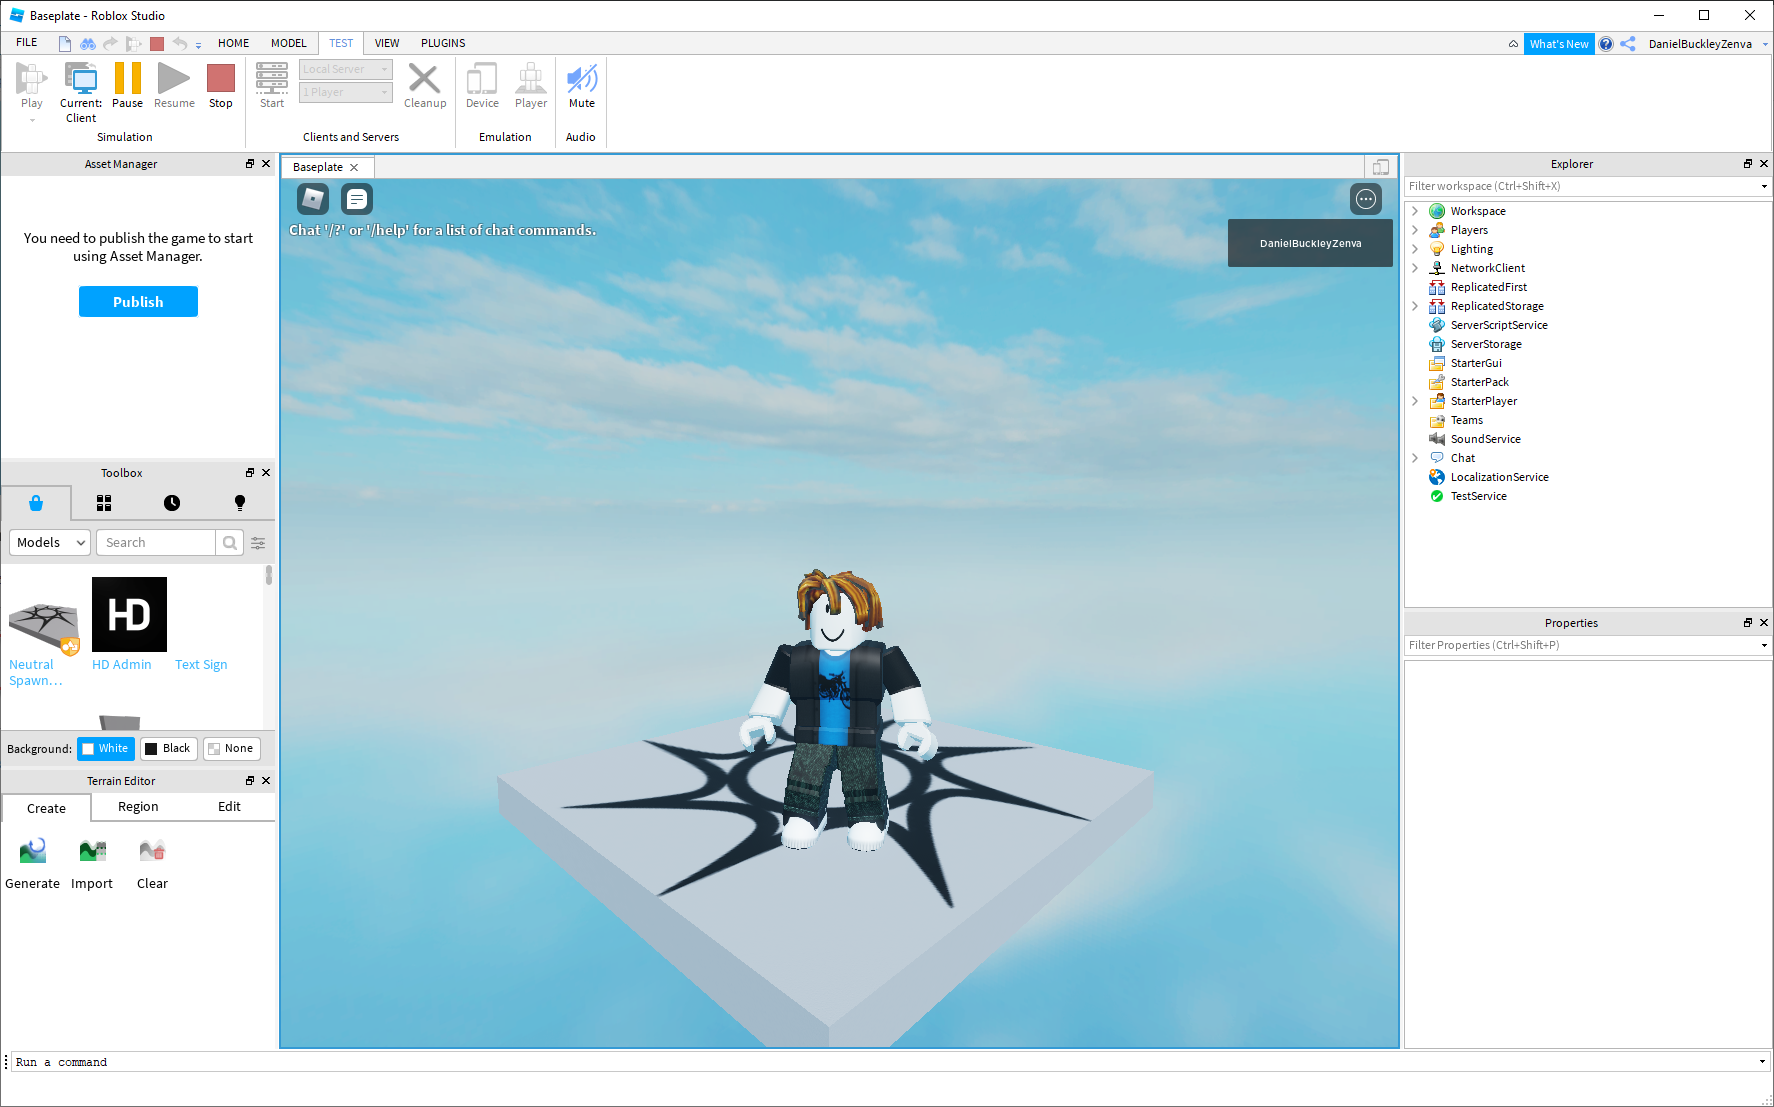 Playing a game in Roblox Studio